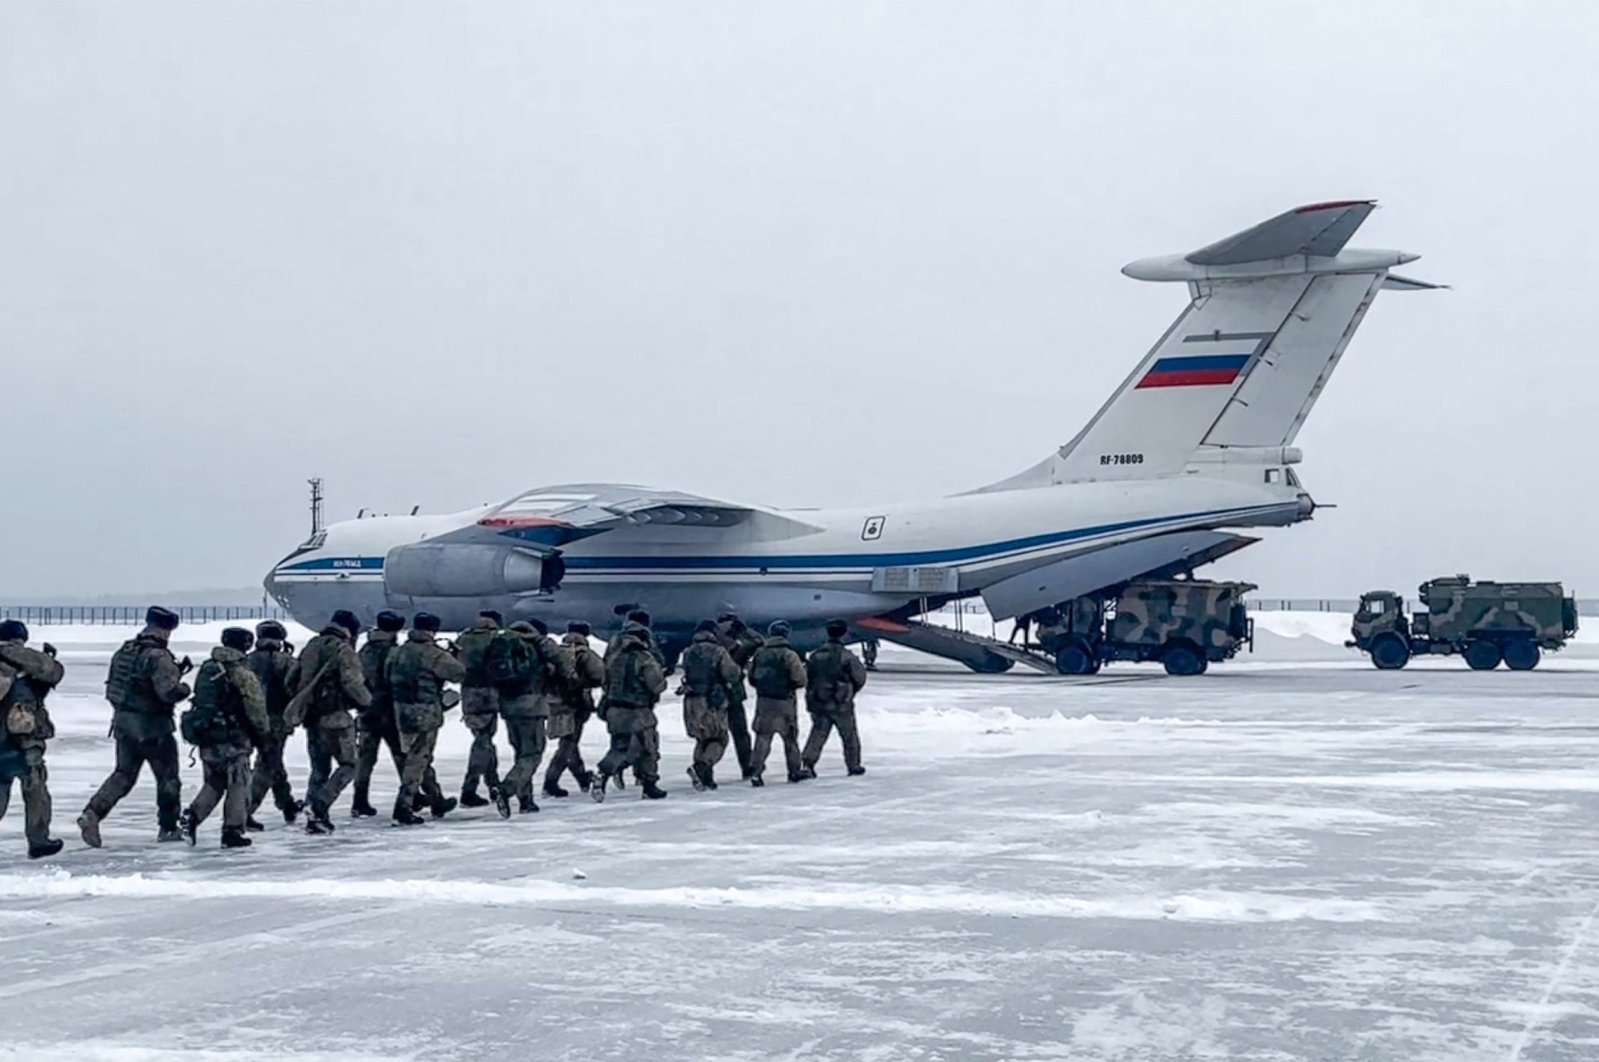 Russia takes full control over Almaty airport in Kazakhstan